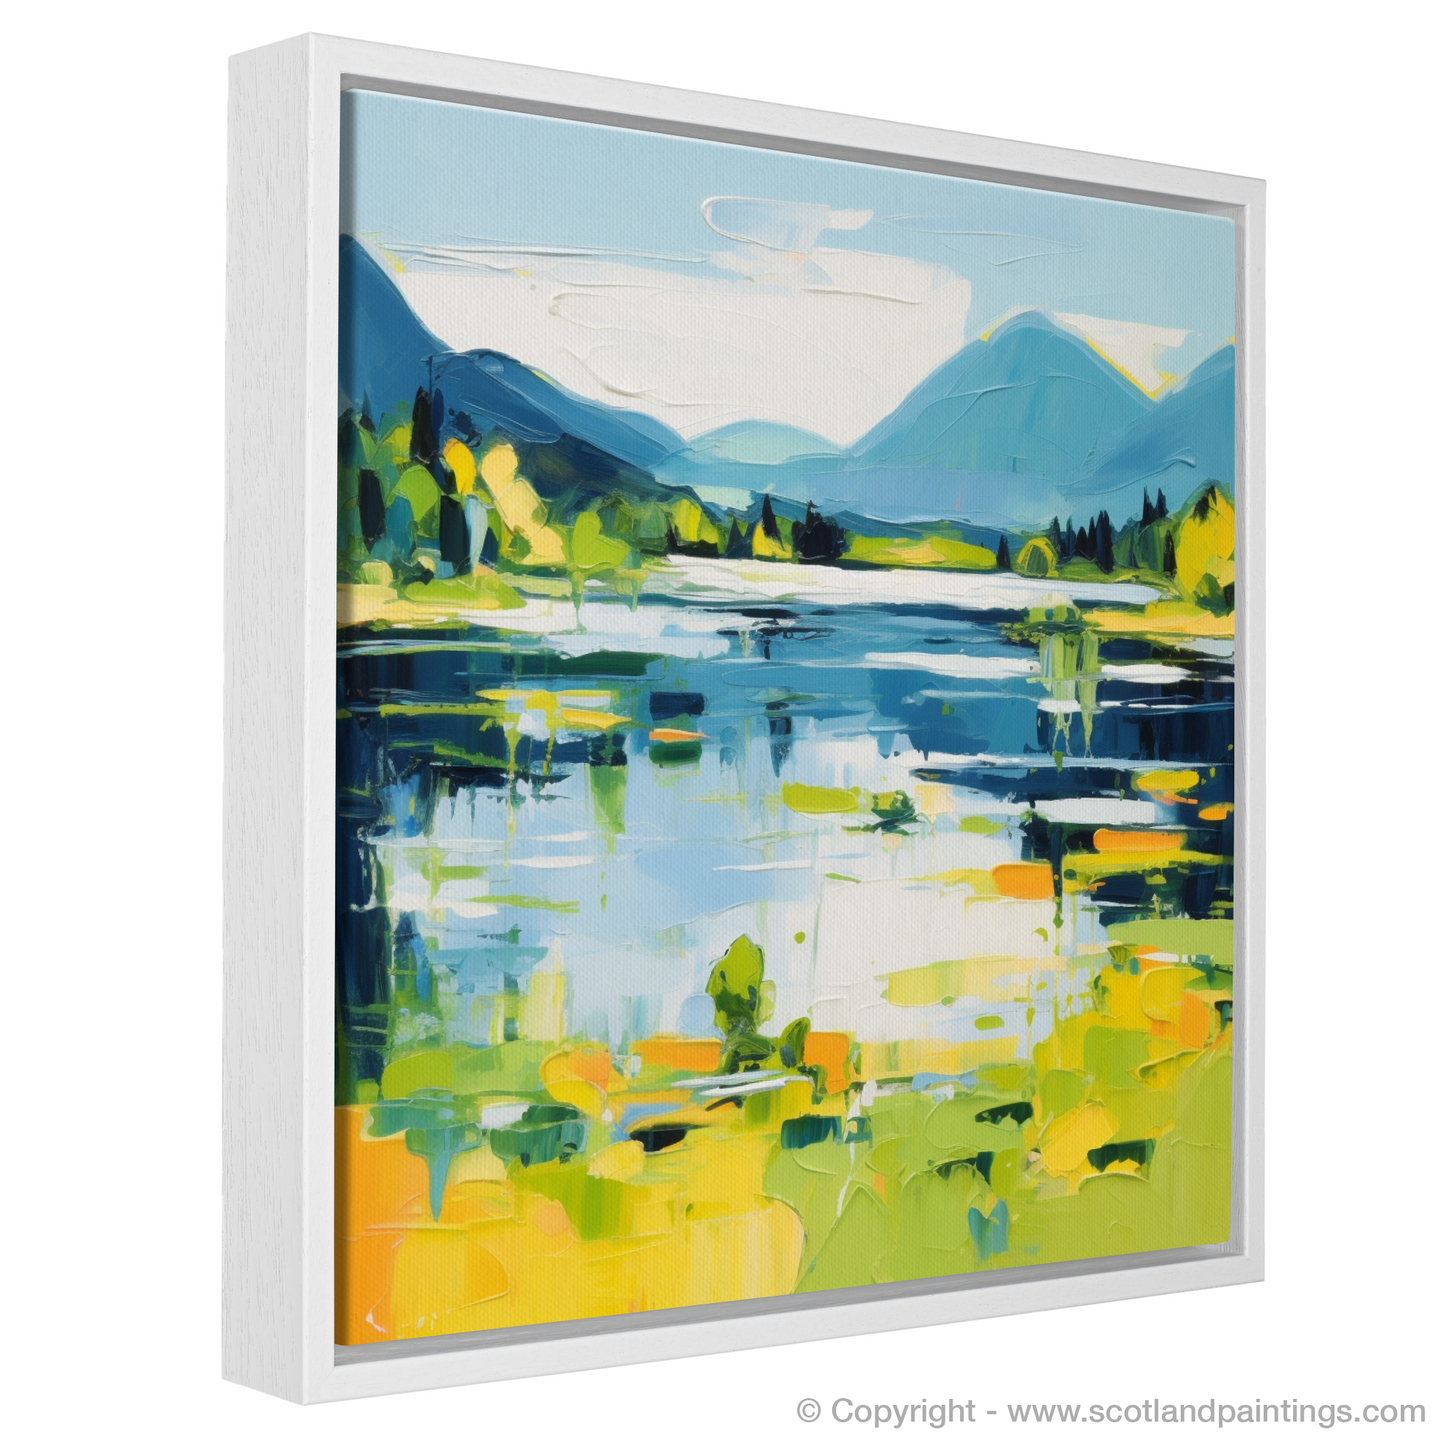 Painting and Art Print of Loch Achray in summer. Abstract Serenade of Loch Achray in Summer Splendour.